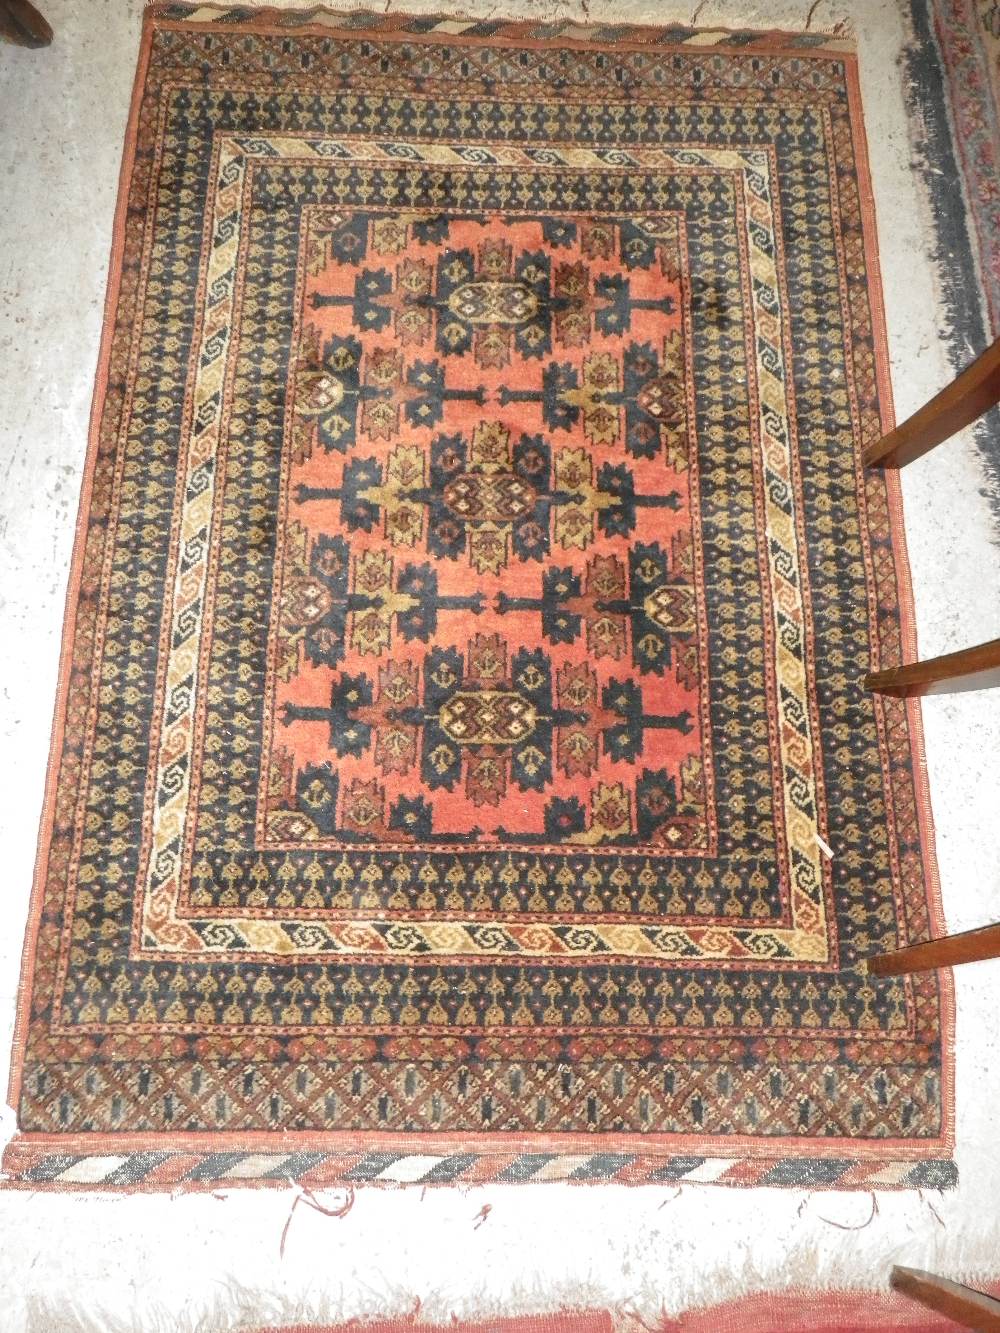 A russet ground Persian rug with overall geometric decoration